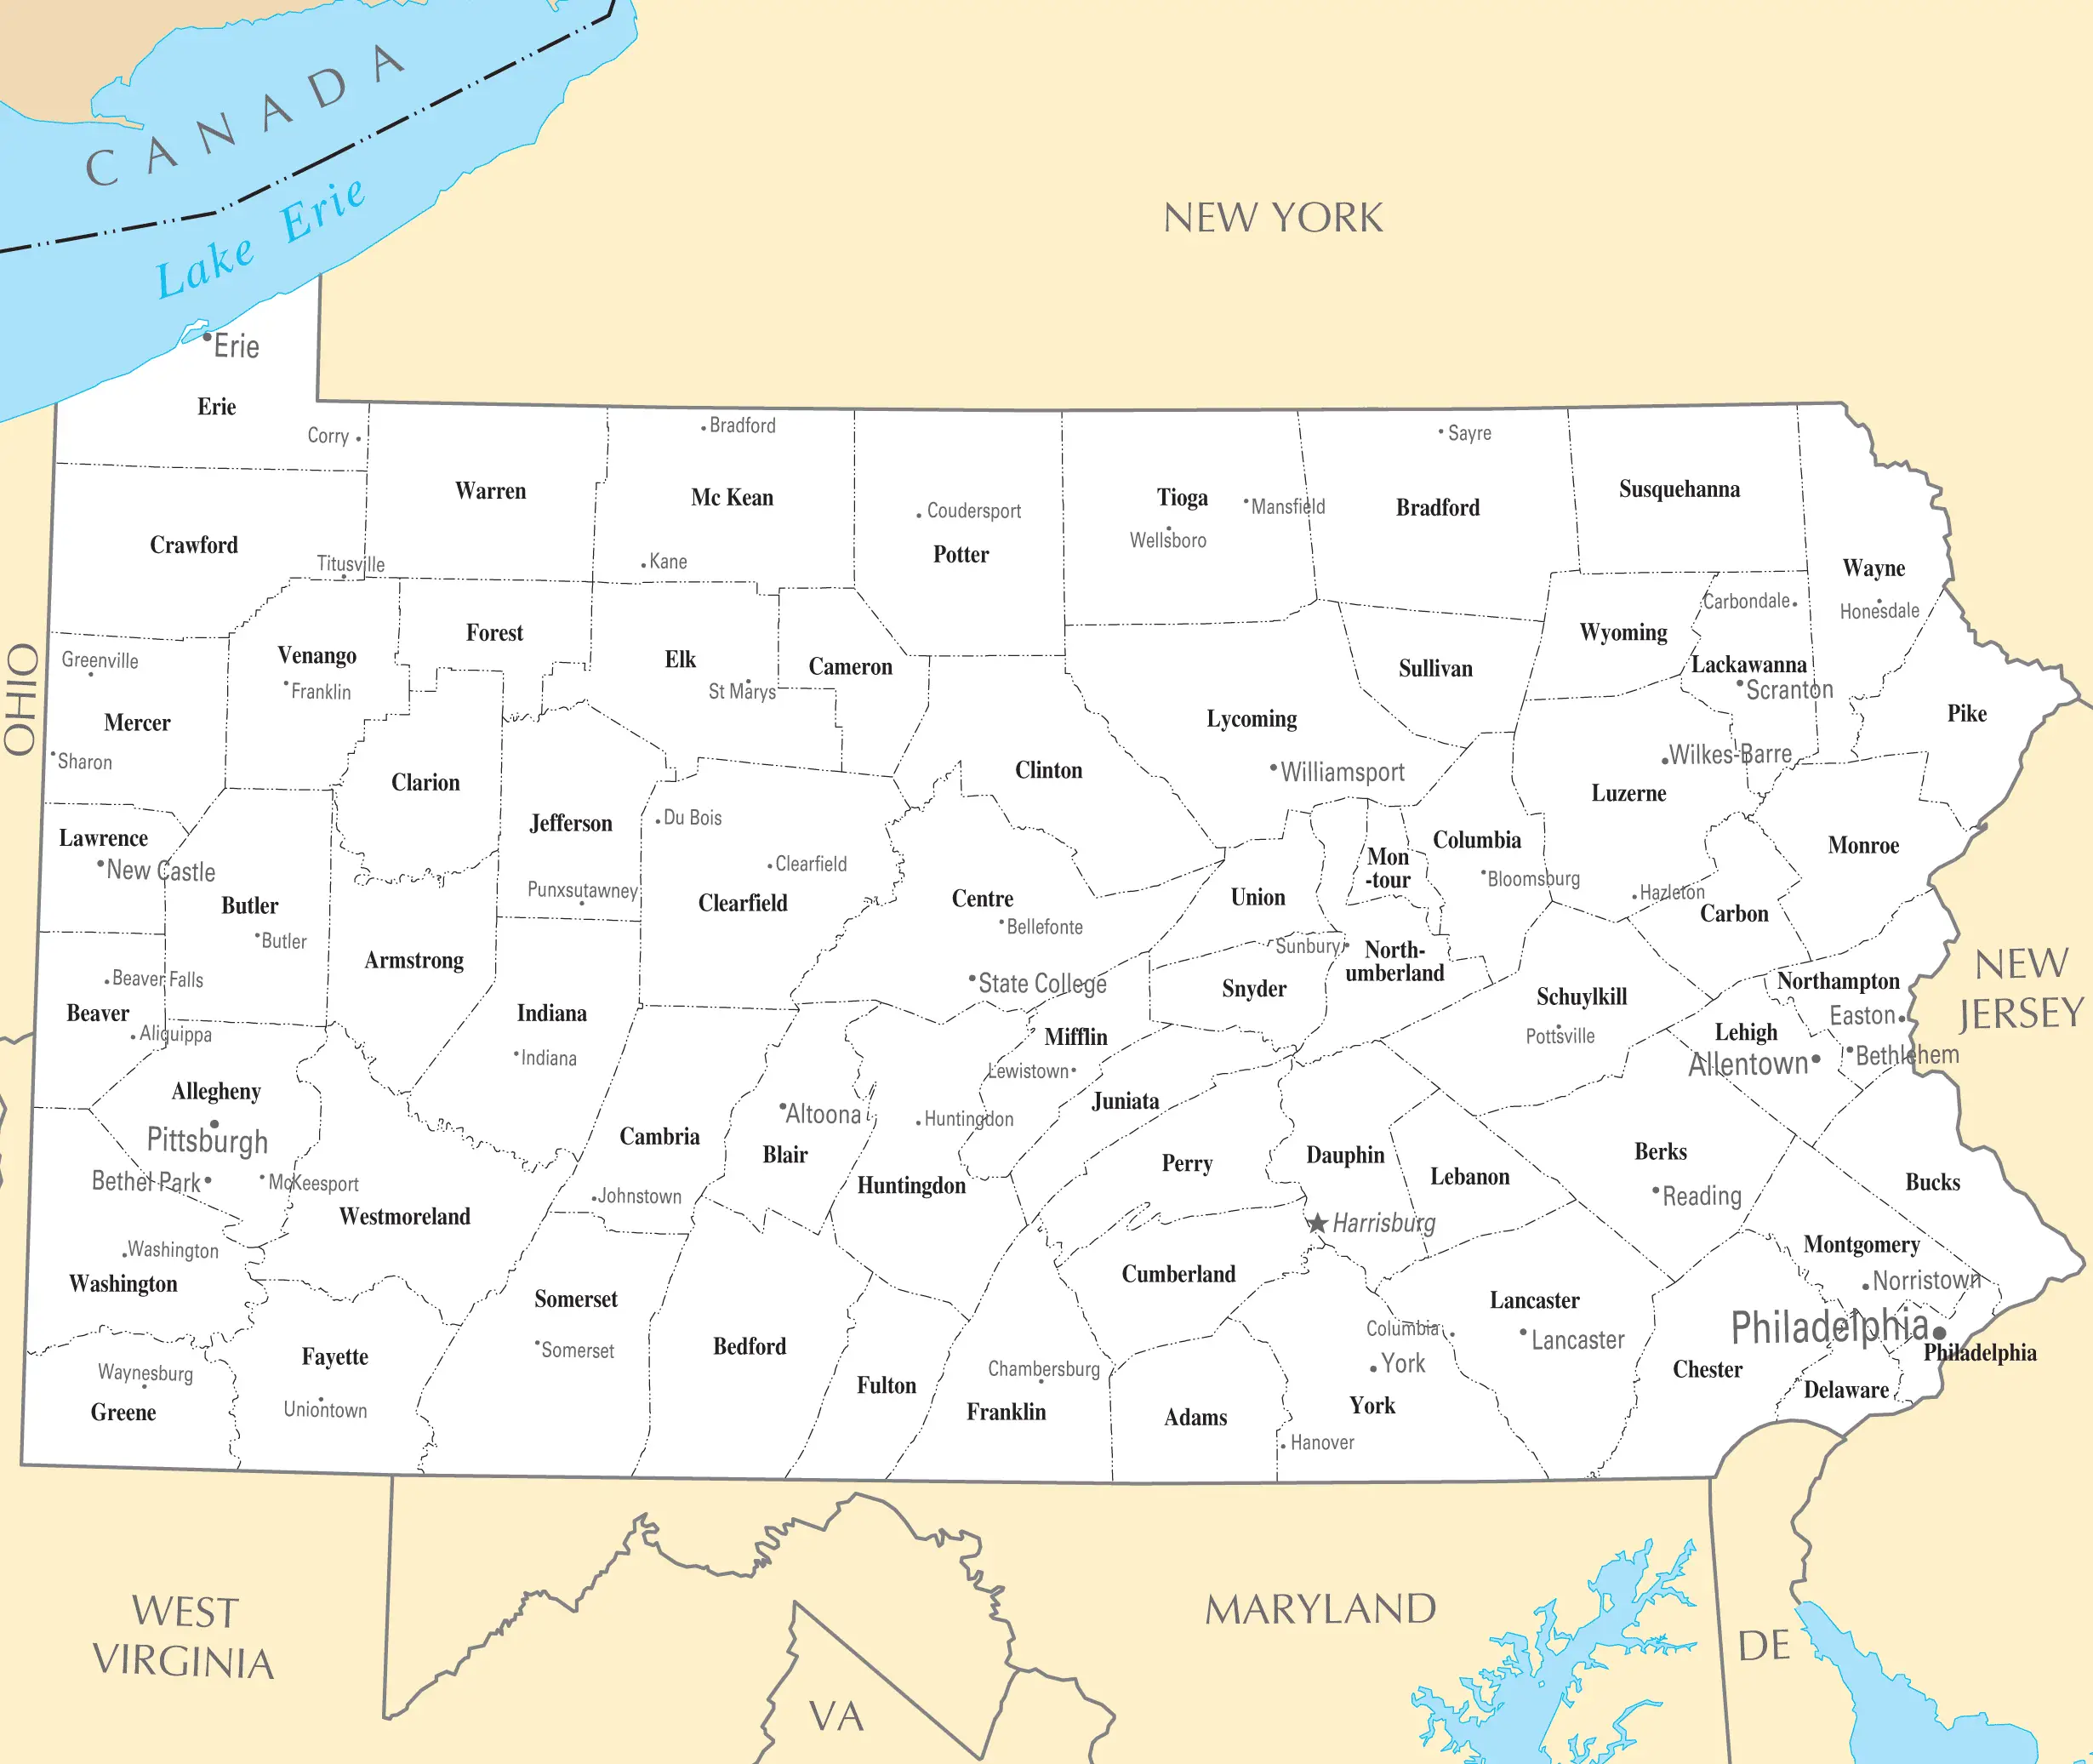 Pennsylvania Cities And Towns - MapSof.net